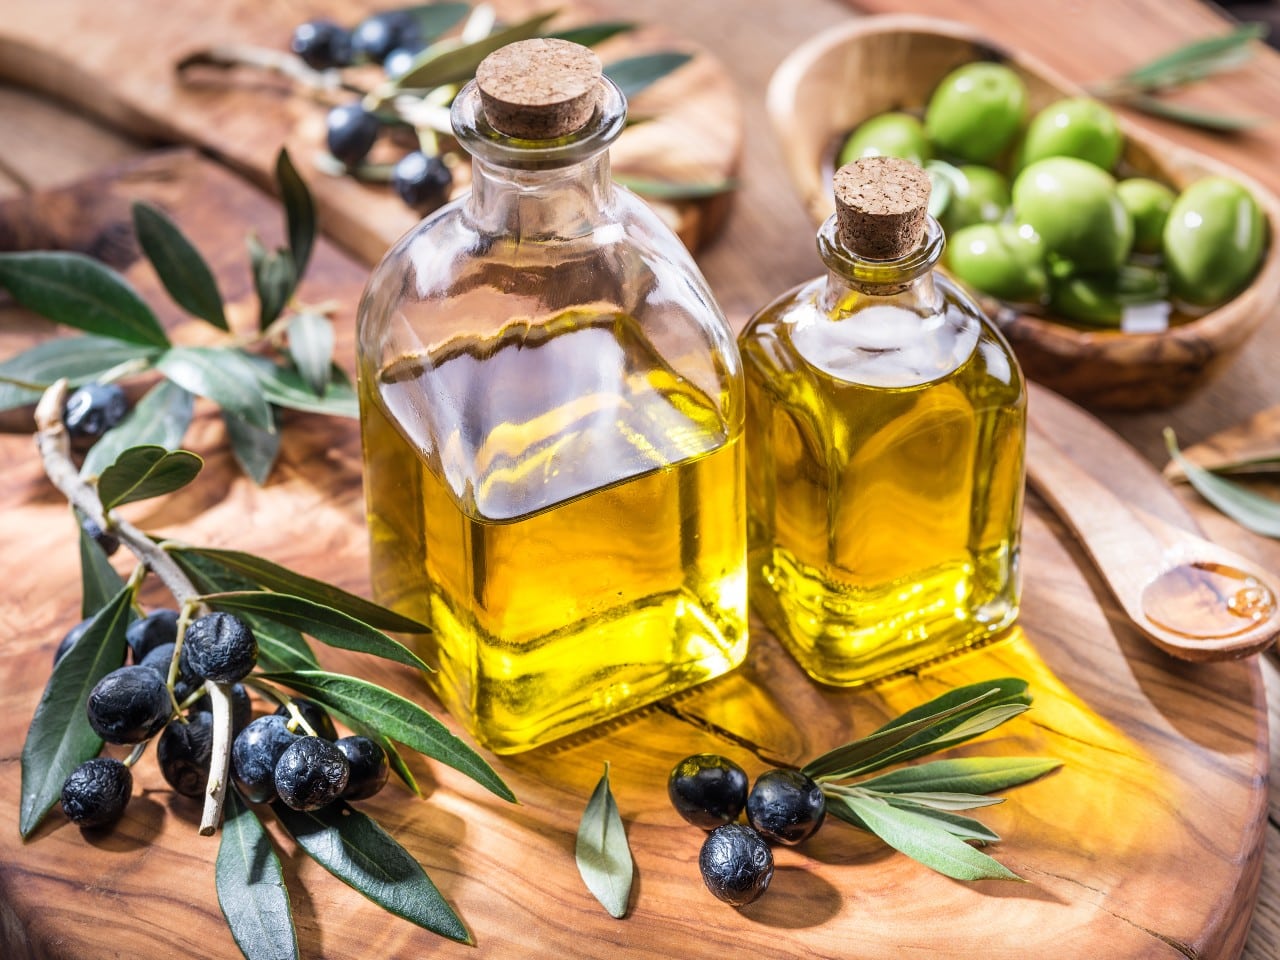 Olive Oil – the healthy fat many agree on